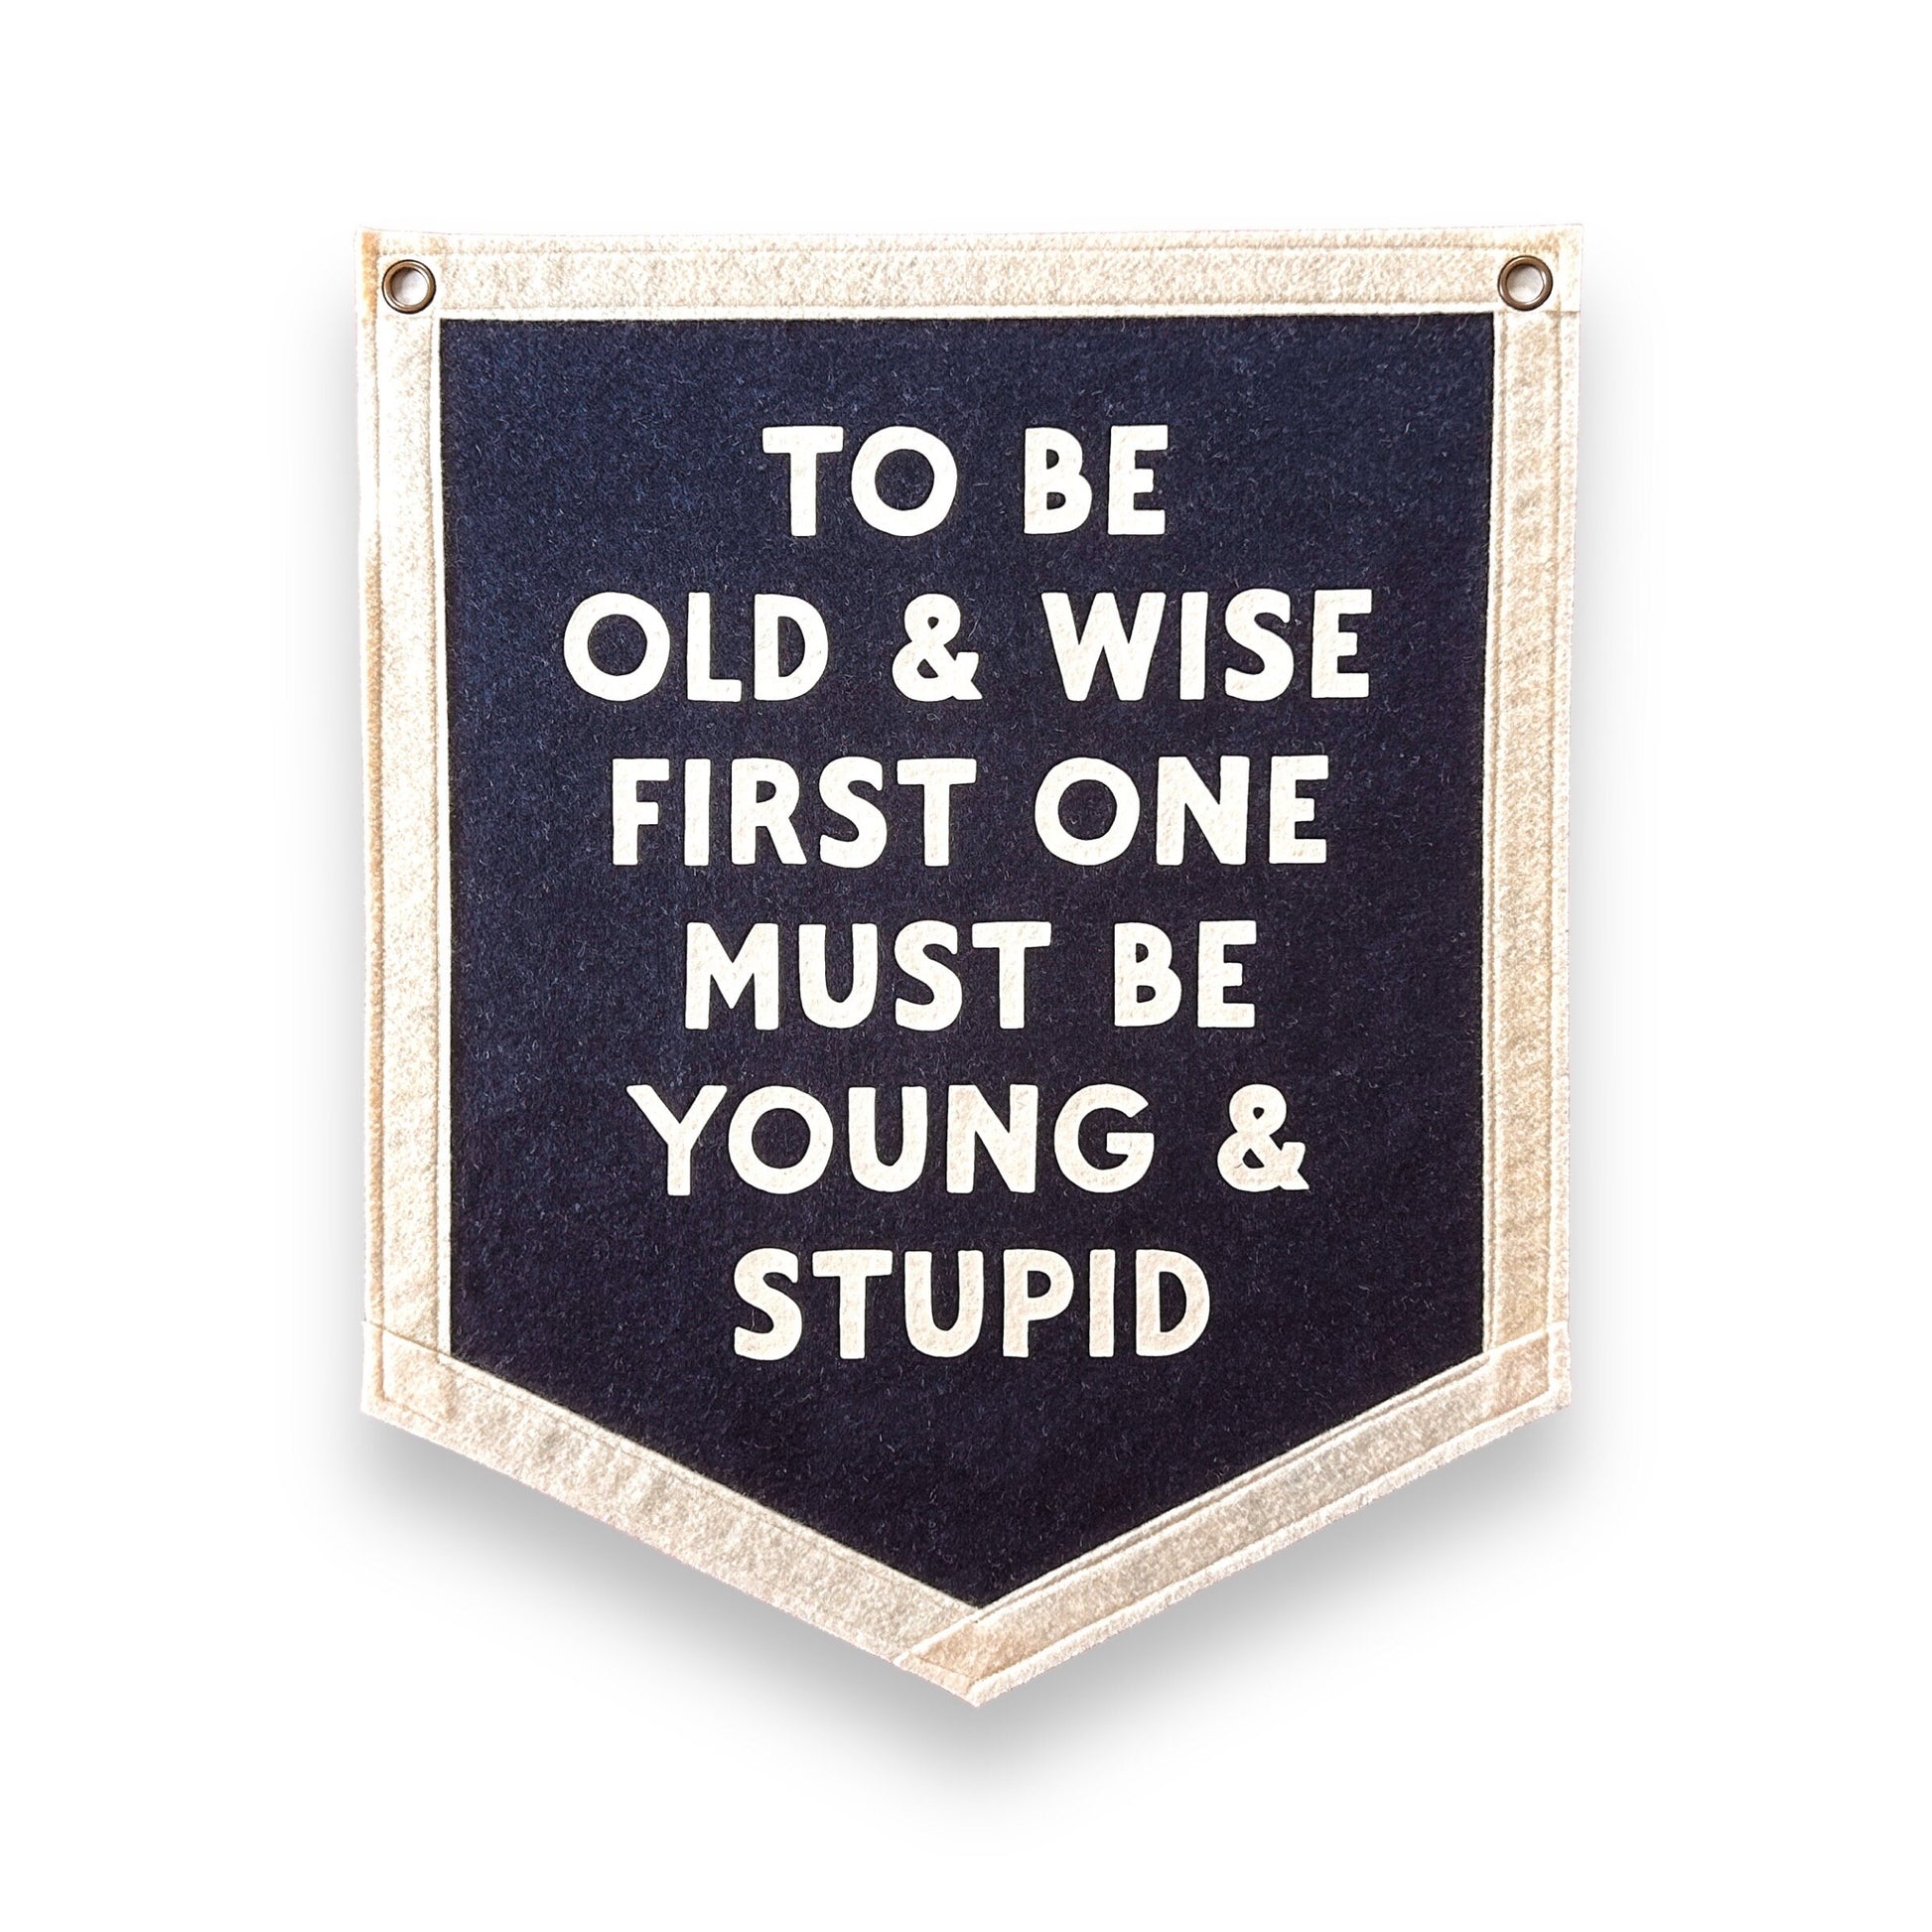 To be Old and Wise, first one must be Young and Stupid | Felt Pennant Flag Banner | Vintage Banner | Wall Decor | Wall Hanging